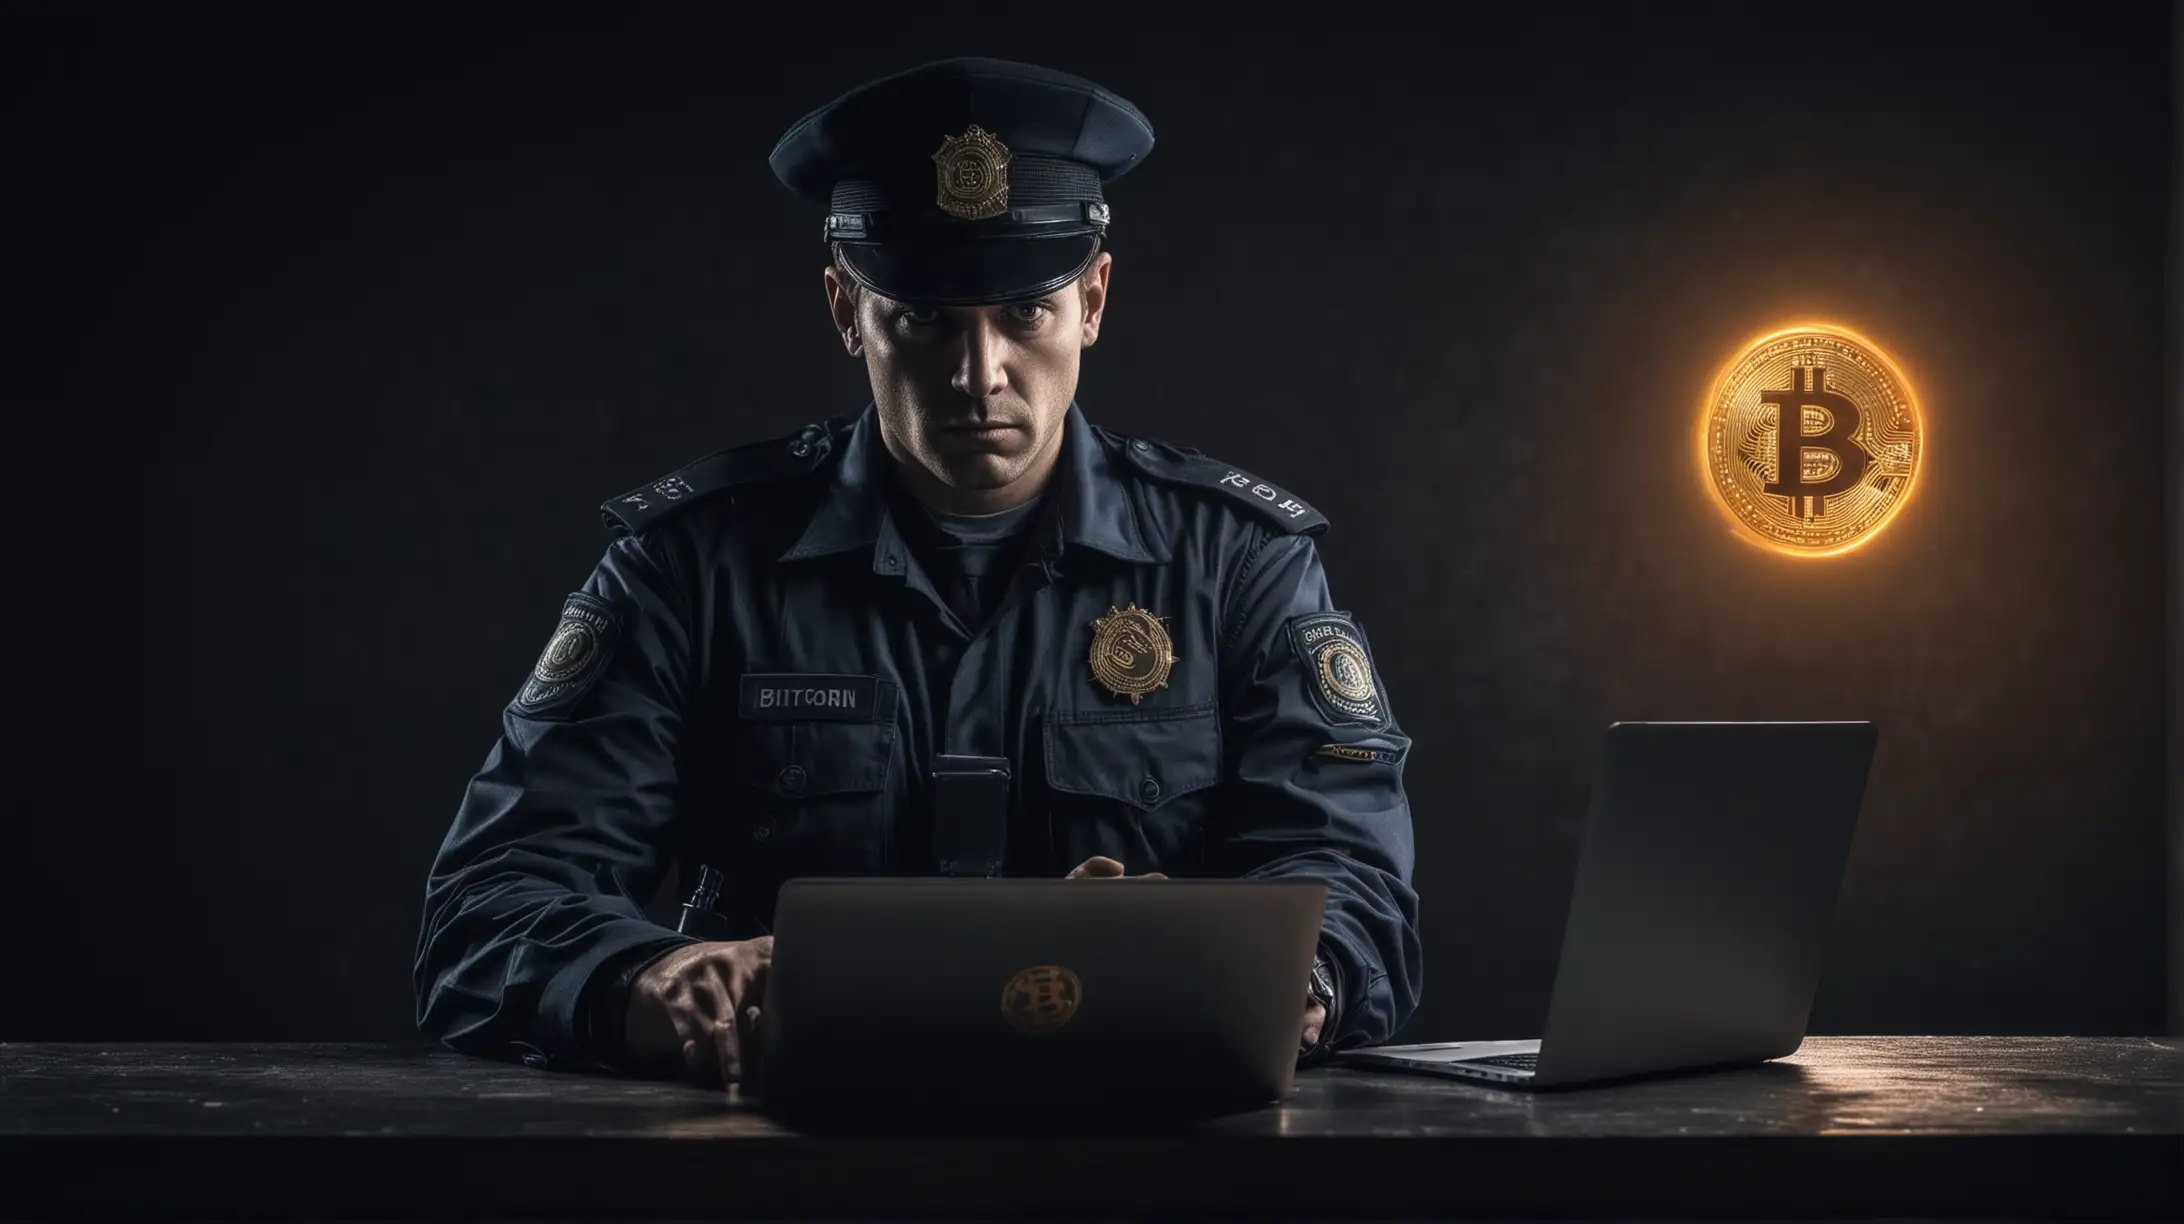 Police Officer Monitoring Cryptocurrency Transactions in Dimly Lit Room